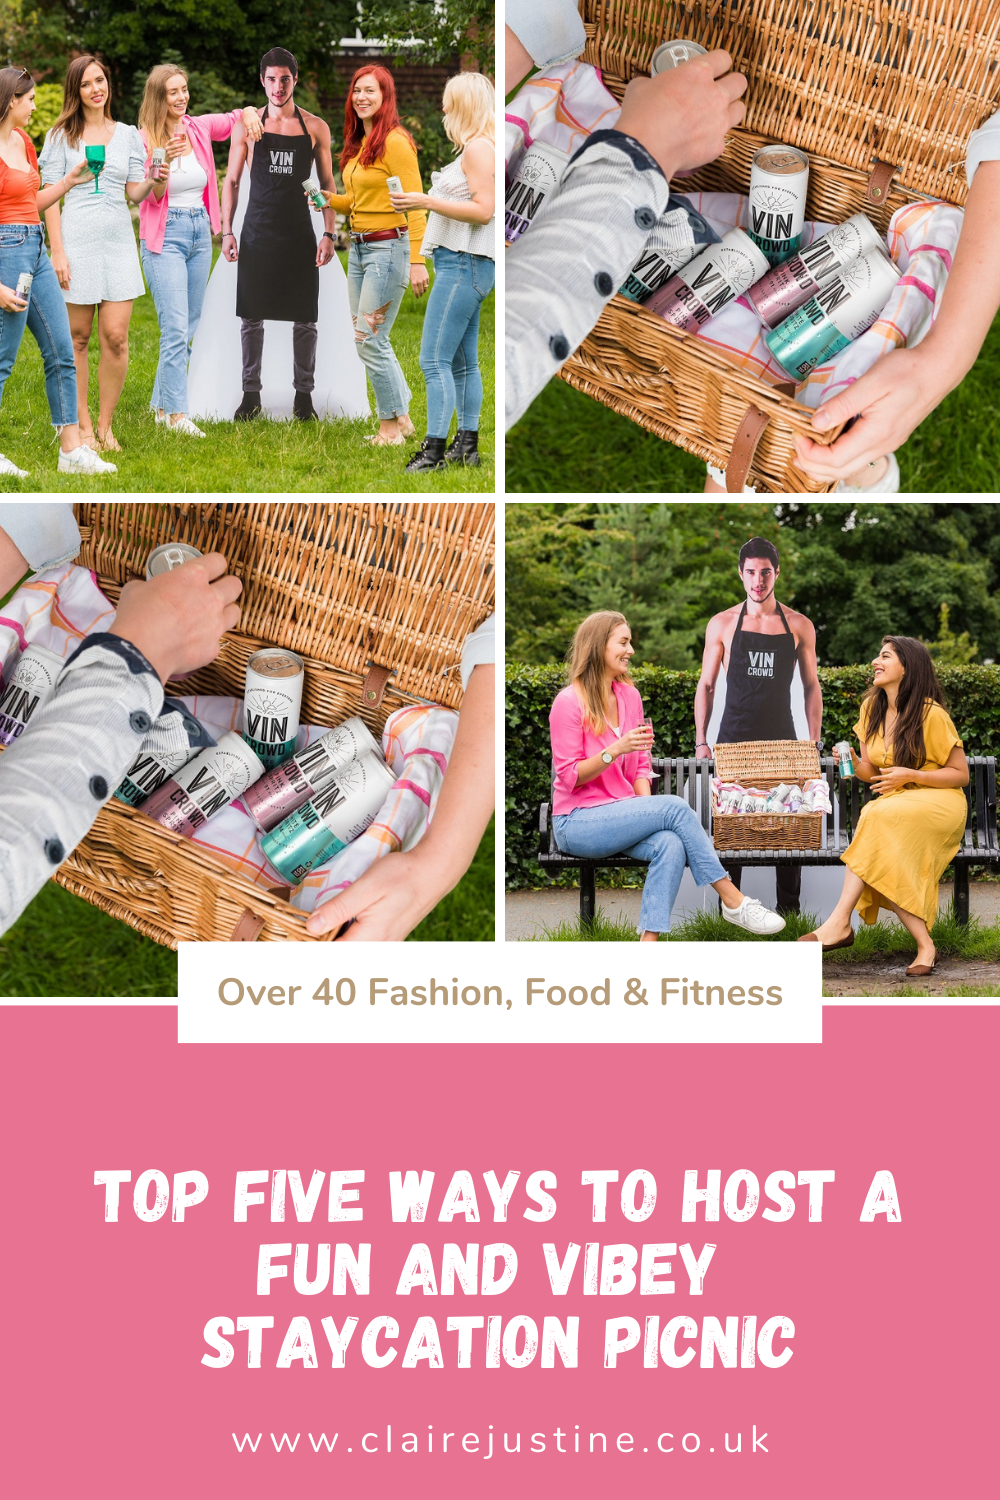 Top Five Ways To Host A Fun And Vibey Staycation Picnic